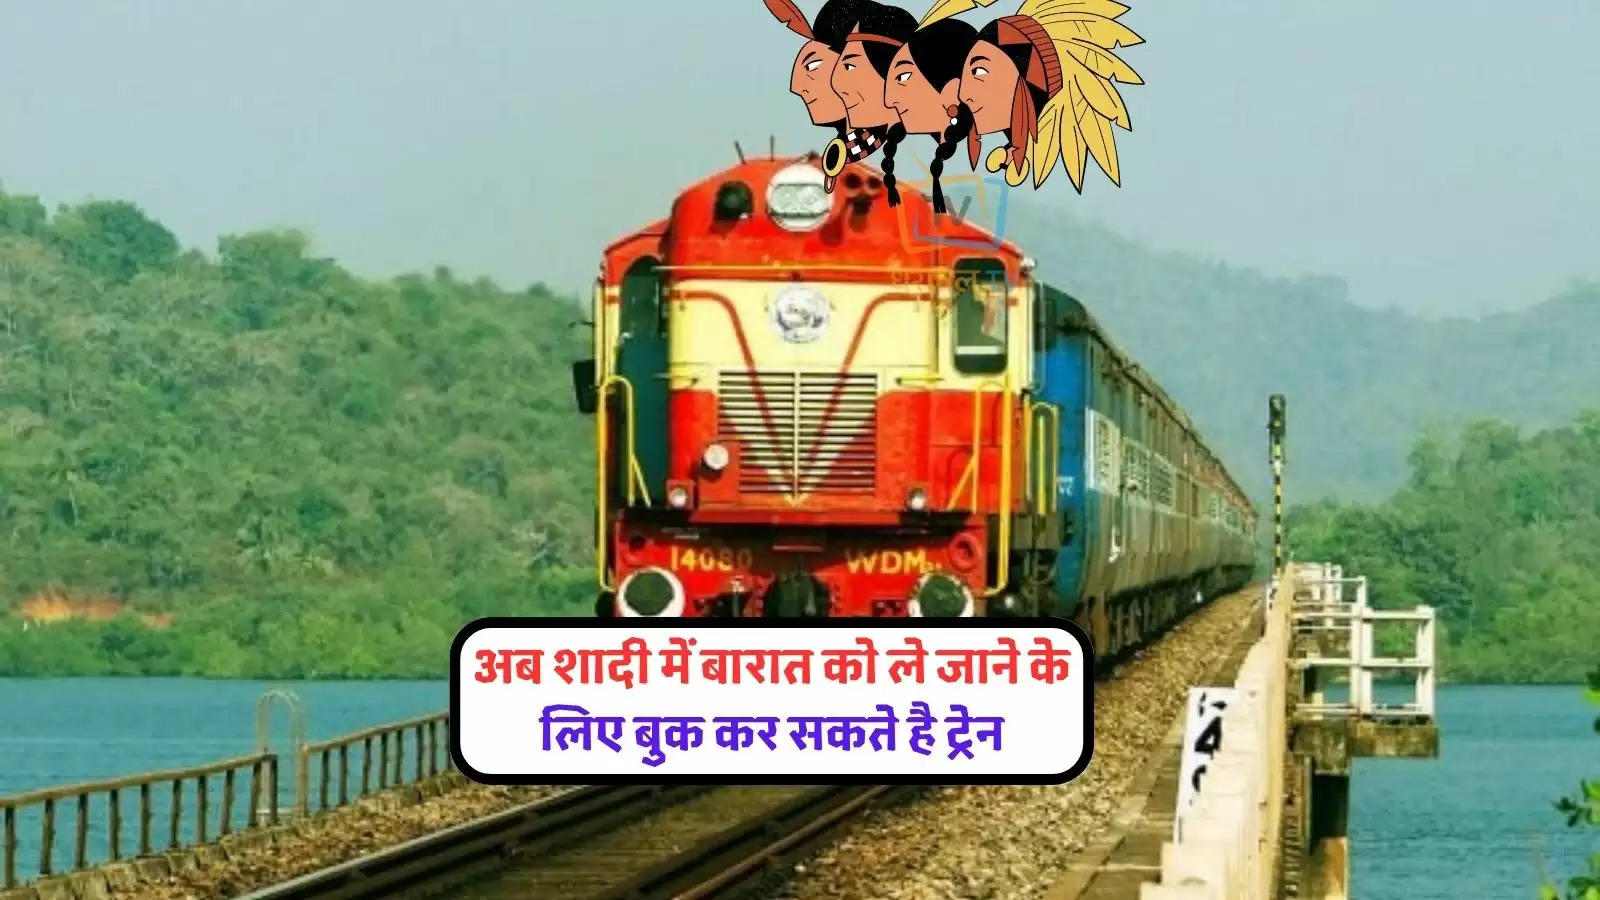 railways-how-to-book-entire-coach-in-train-know-irctc-ftr-services-booking-rules-and-proces